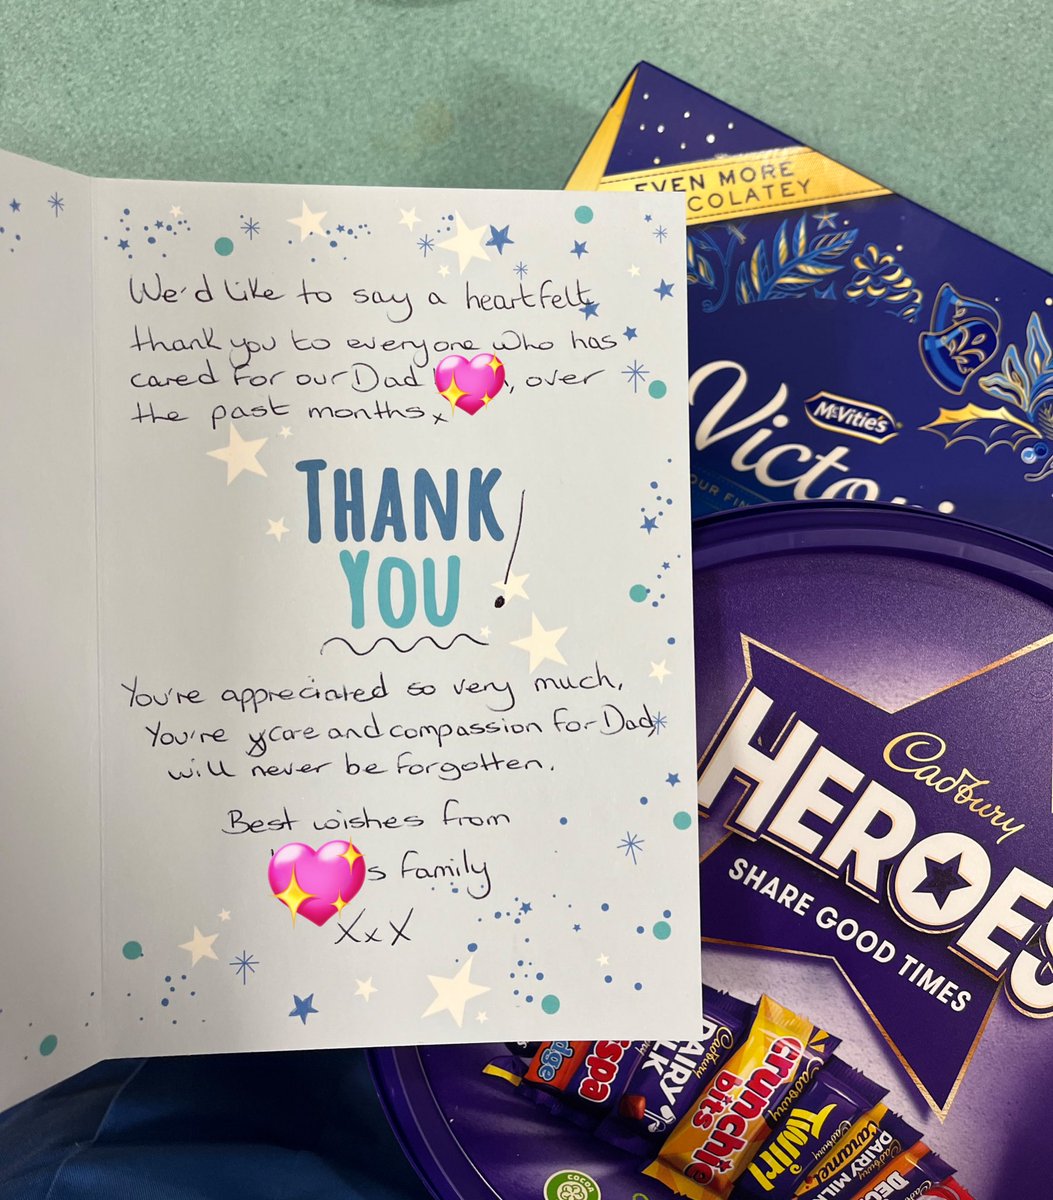 Some beautiful words in a card we received off a patients family member to say thank you for the care that was given!🥰